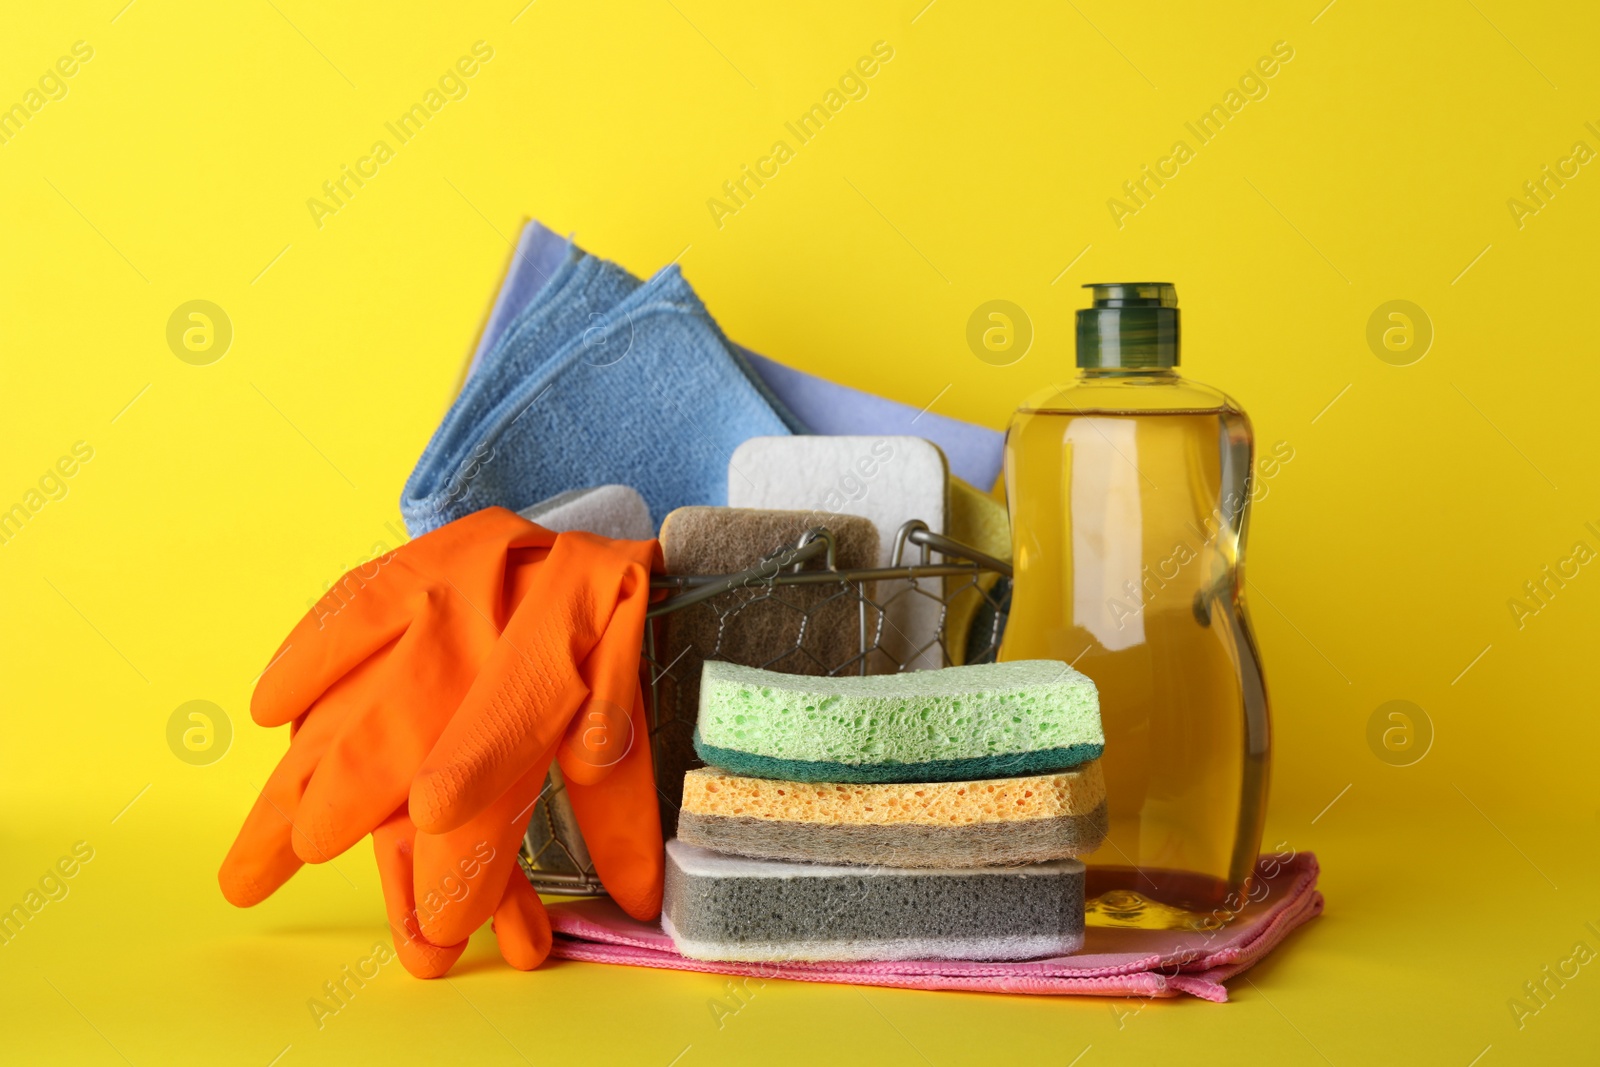 Photo of Sponges and other cleaning products on yellow background